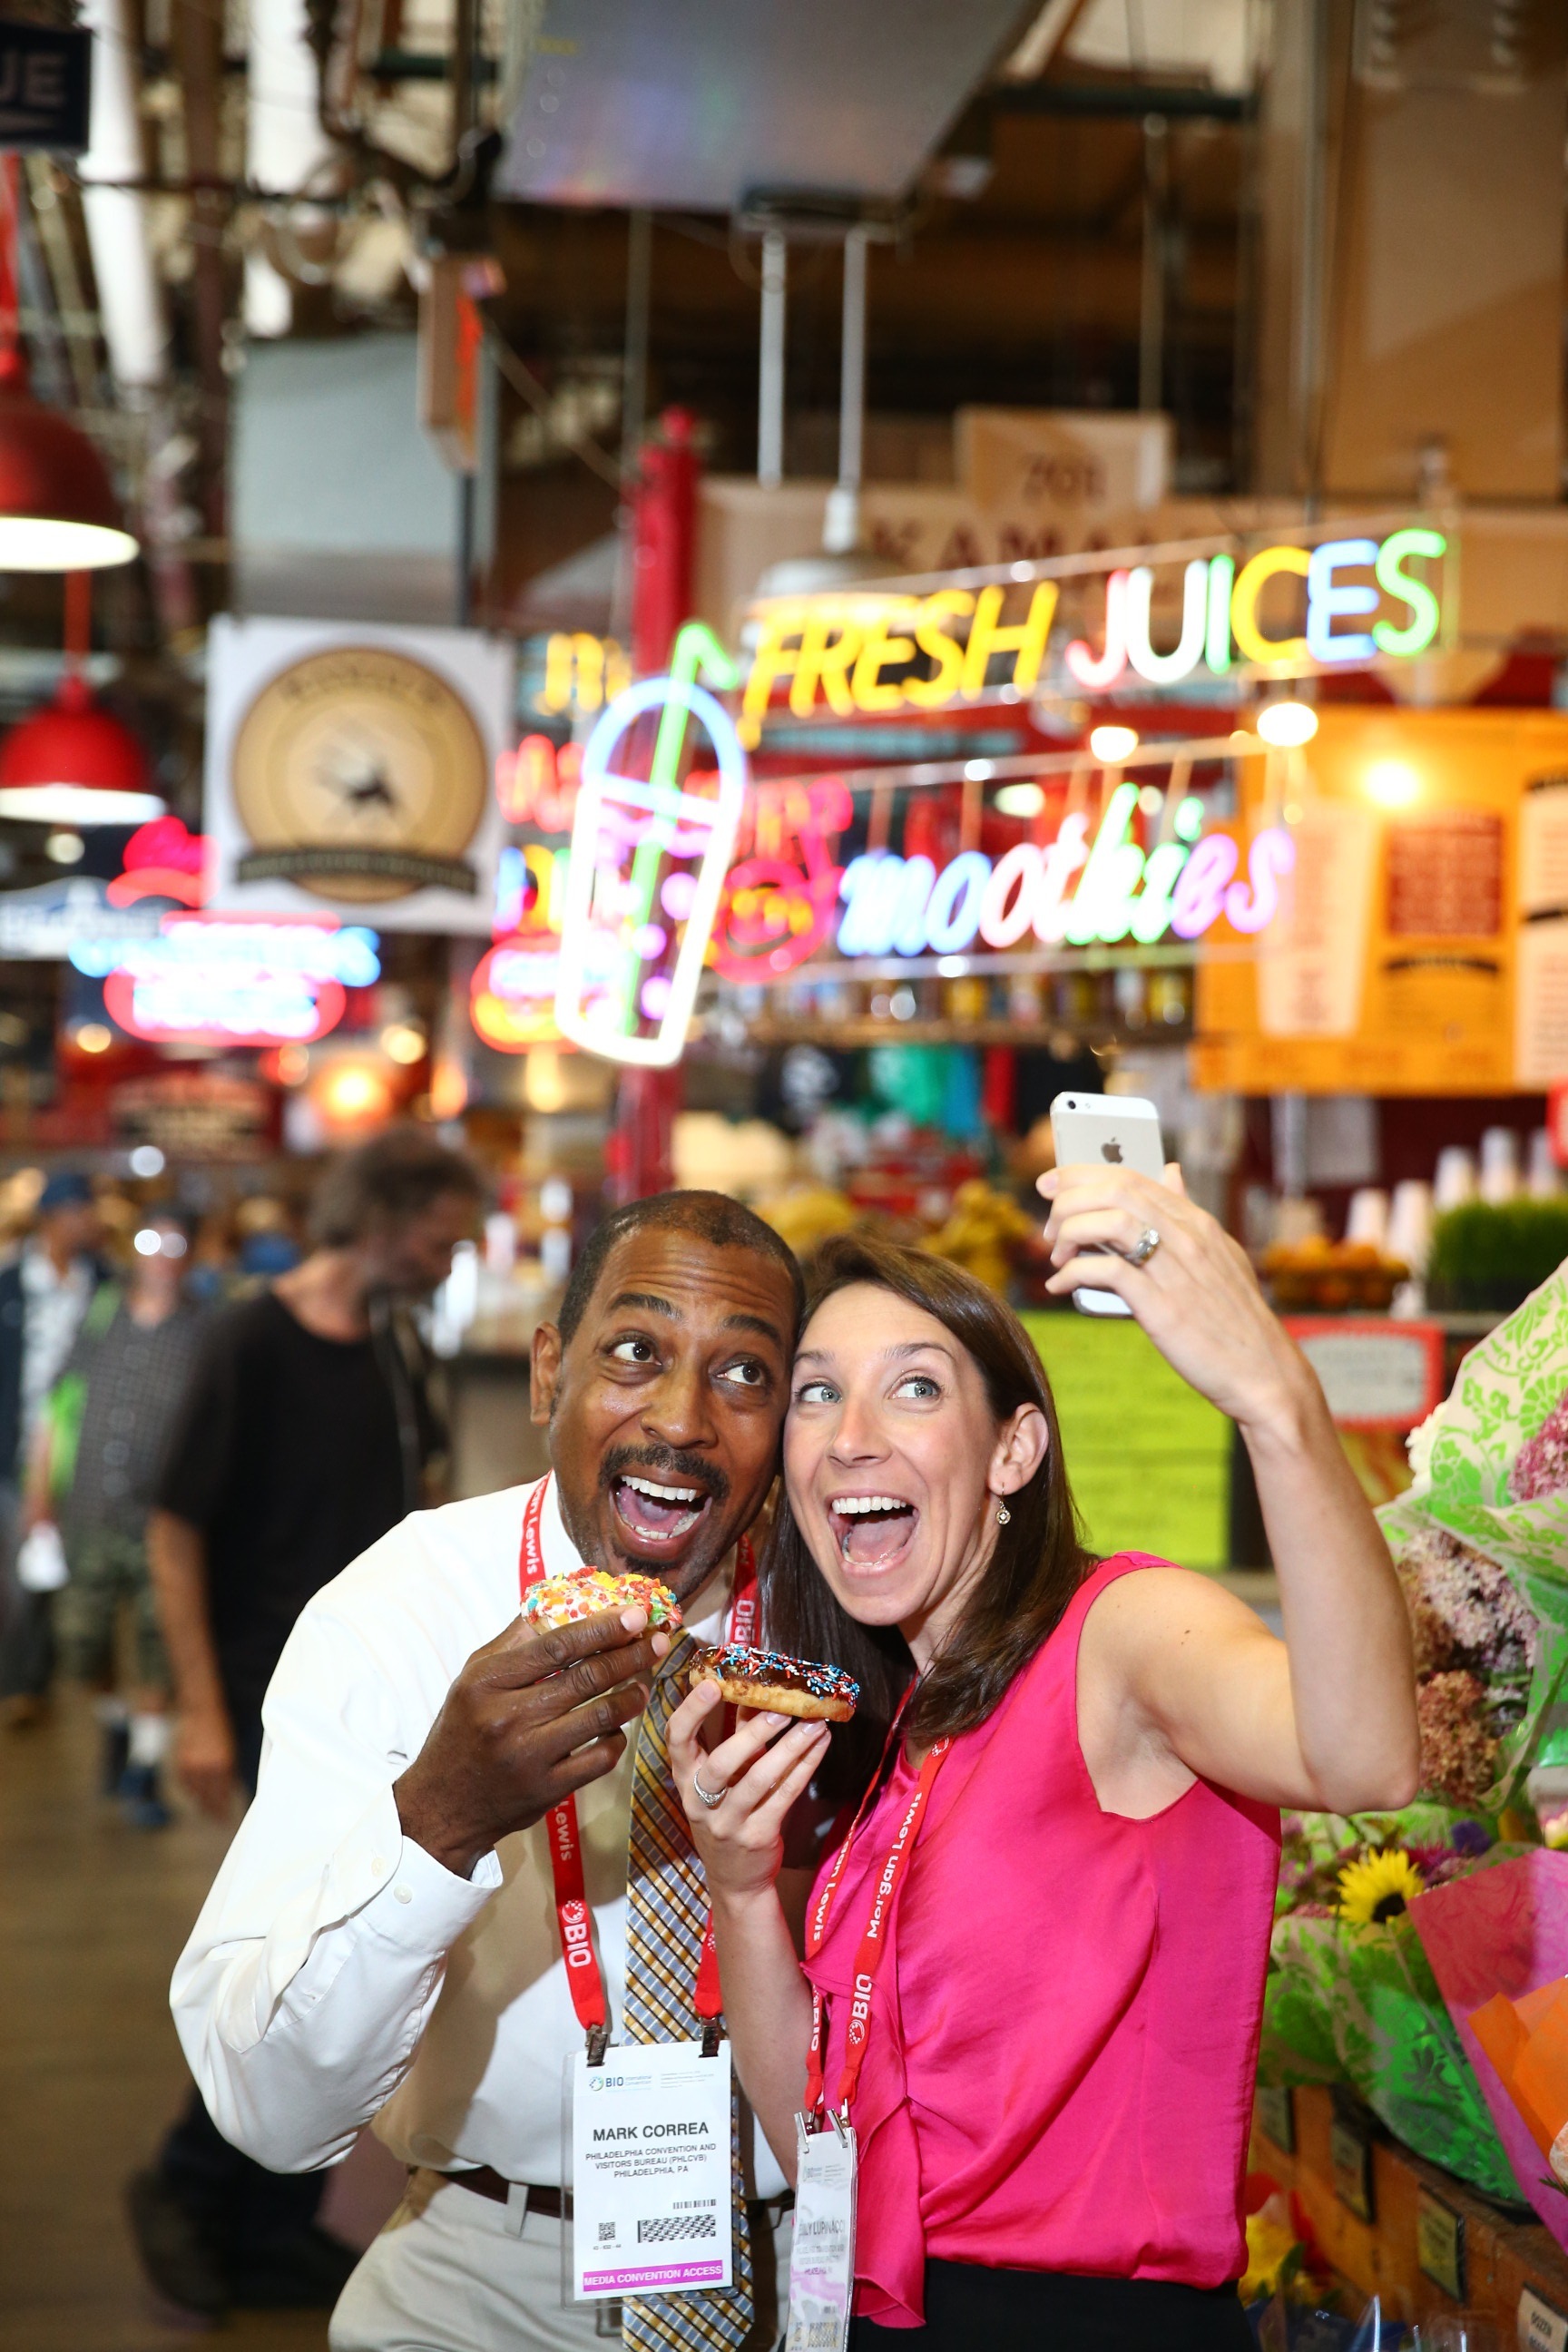 Convention attendees enjoy a bite to eat at the Reading Terminal Market. Photo Credit: JPG Photography